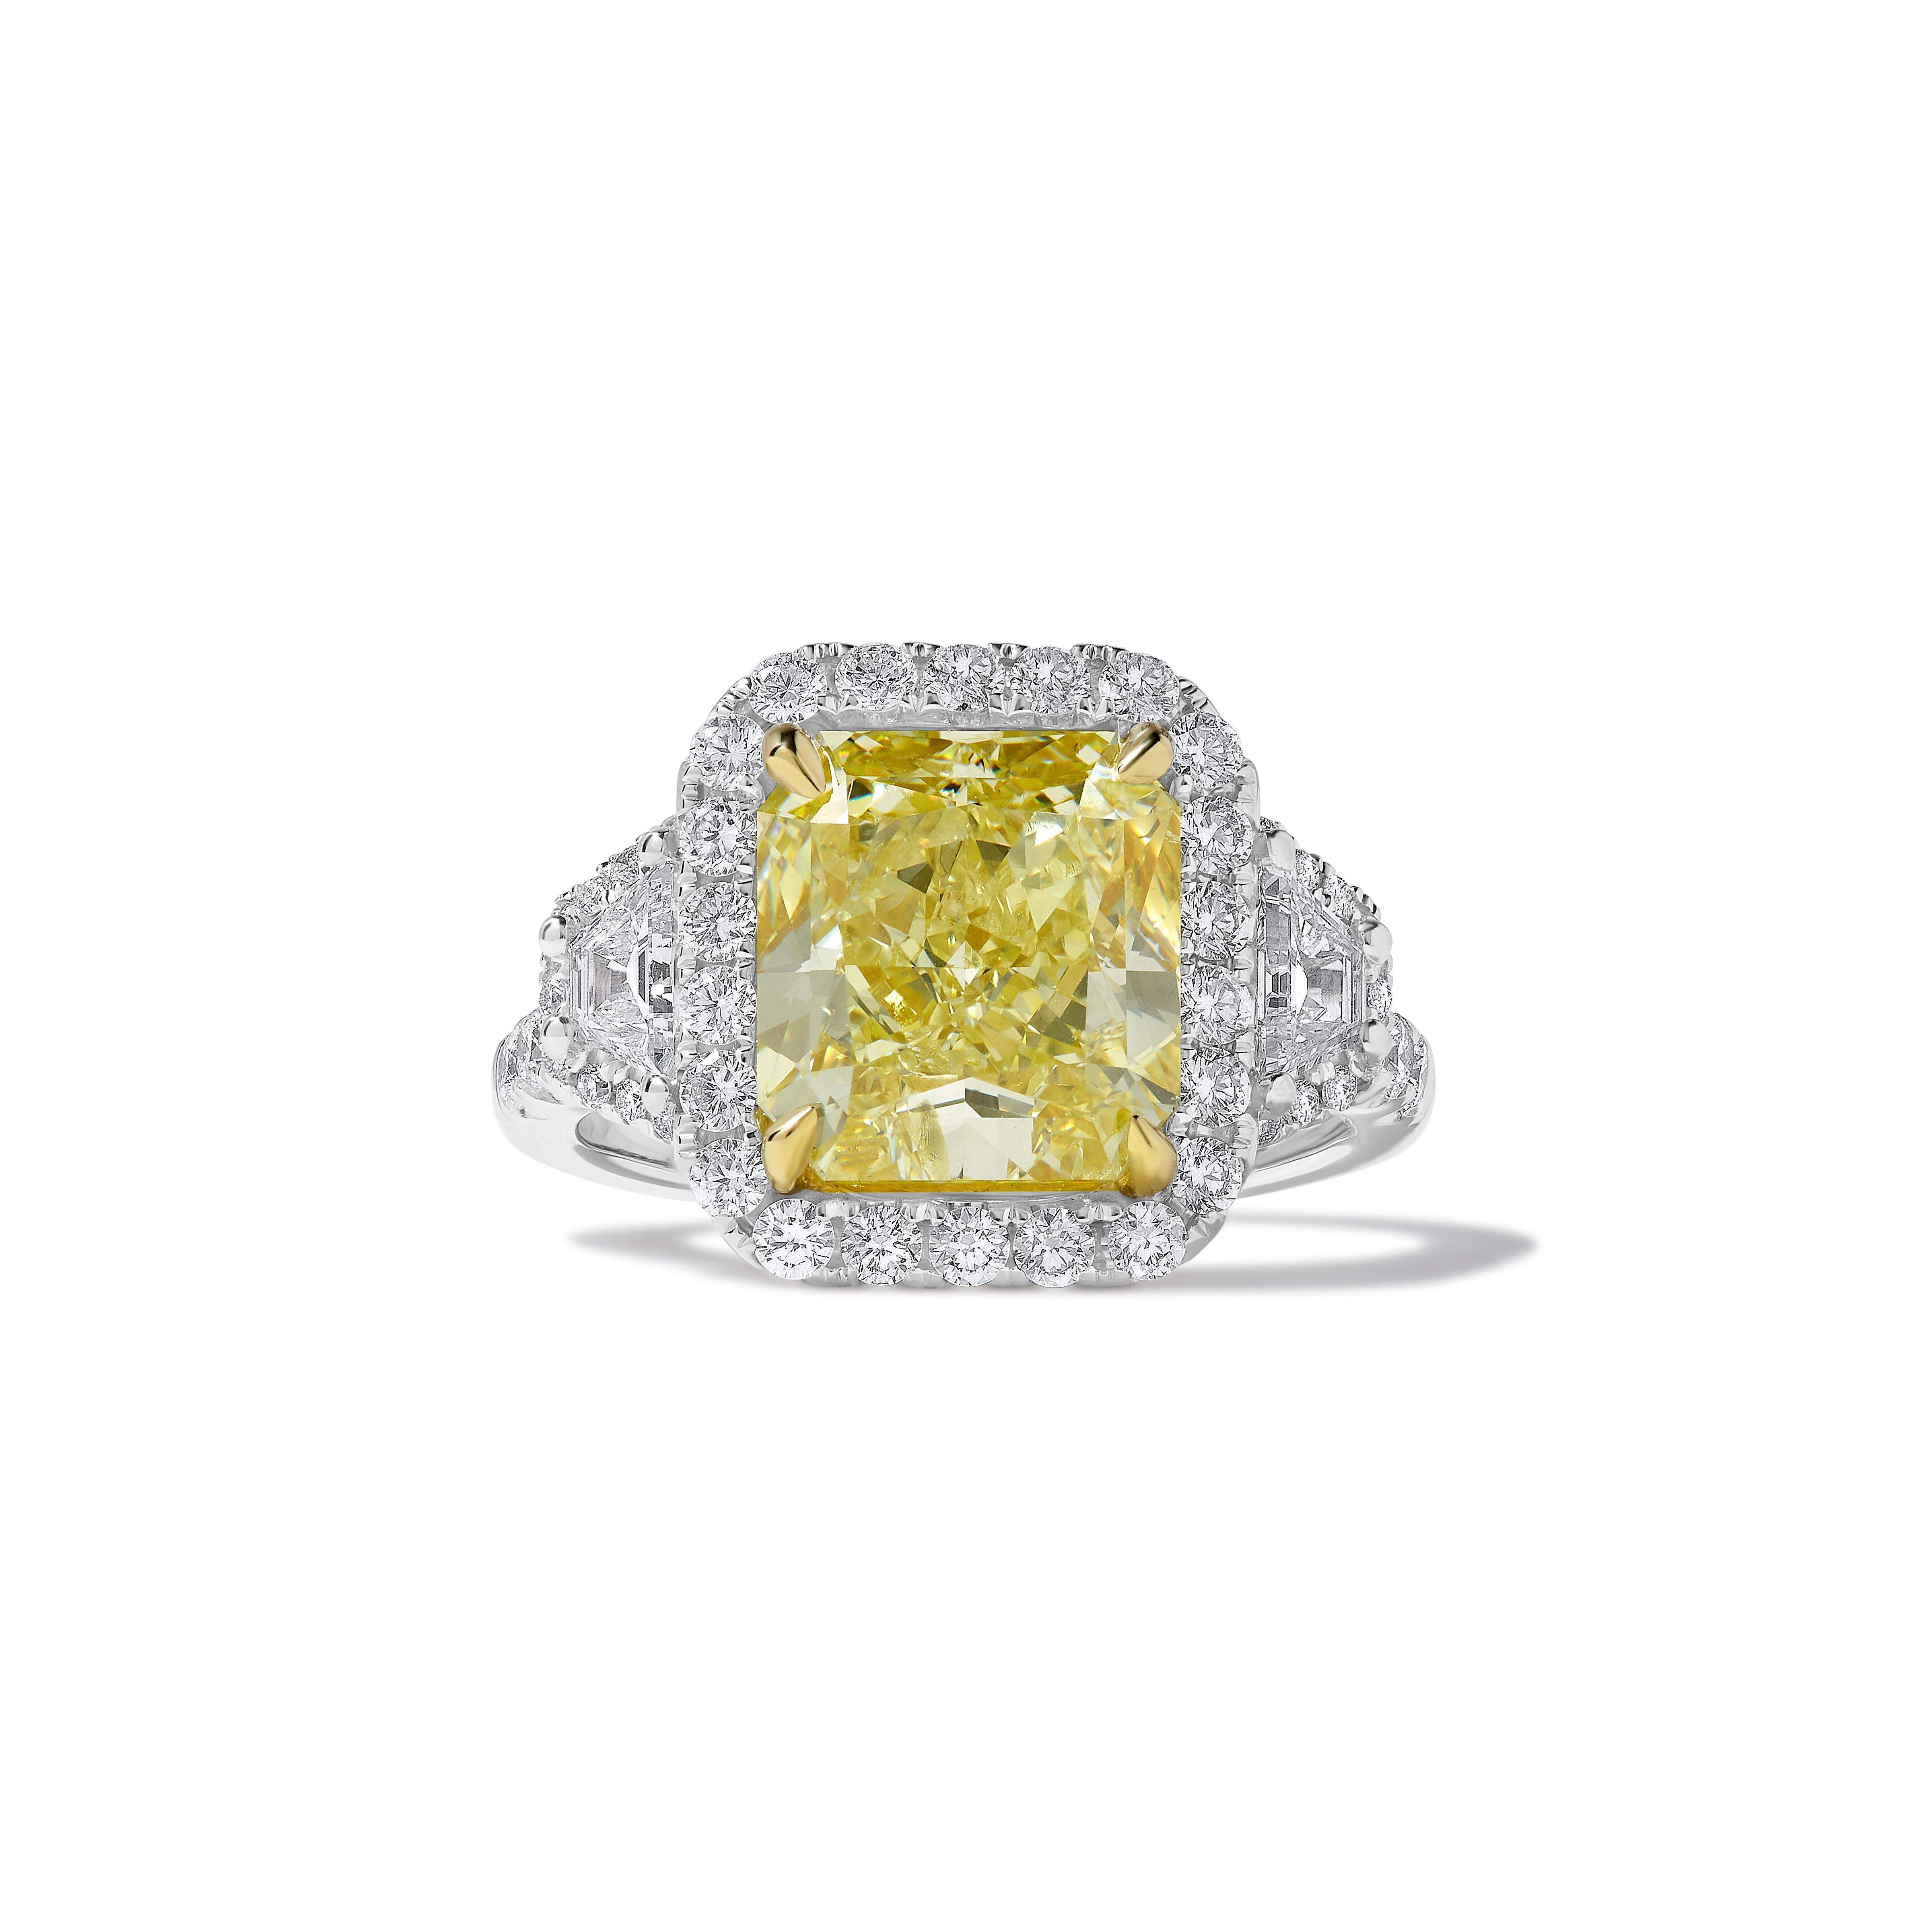 RareGemWorld's classic GIA certified diamond ring. Mounted in a beautiful 18K Yellow and White Gold setting with a natural radiant cut yellow diamond. The yellow diamond is surrounded by natural taper baguette cut white diamonds and round natural